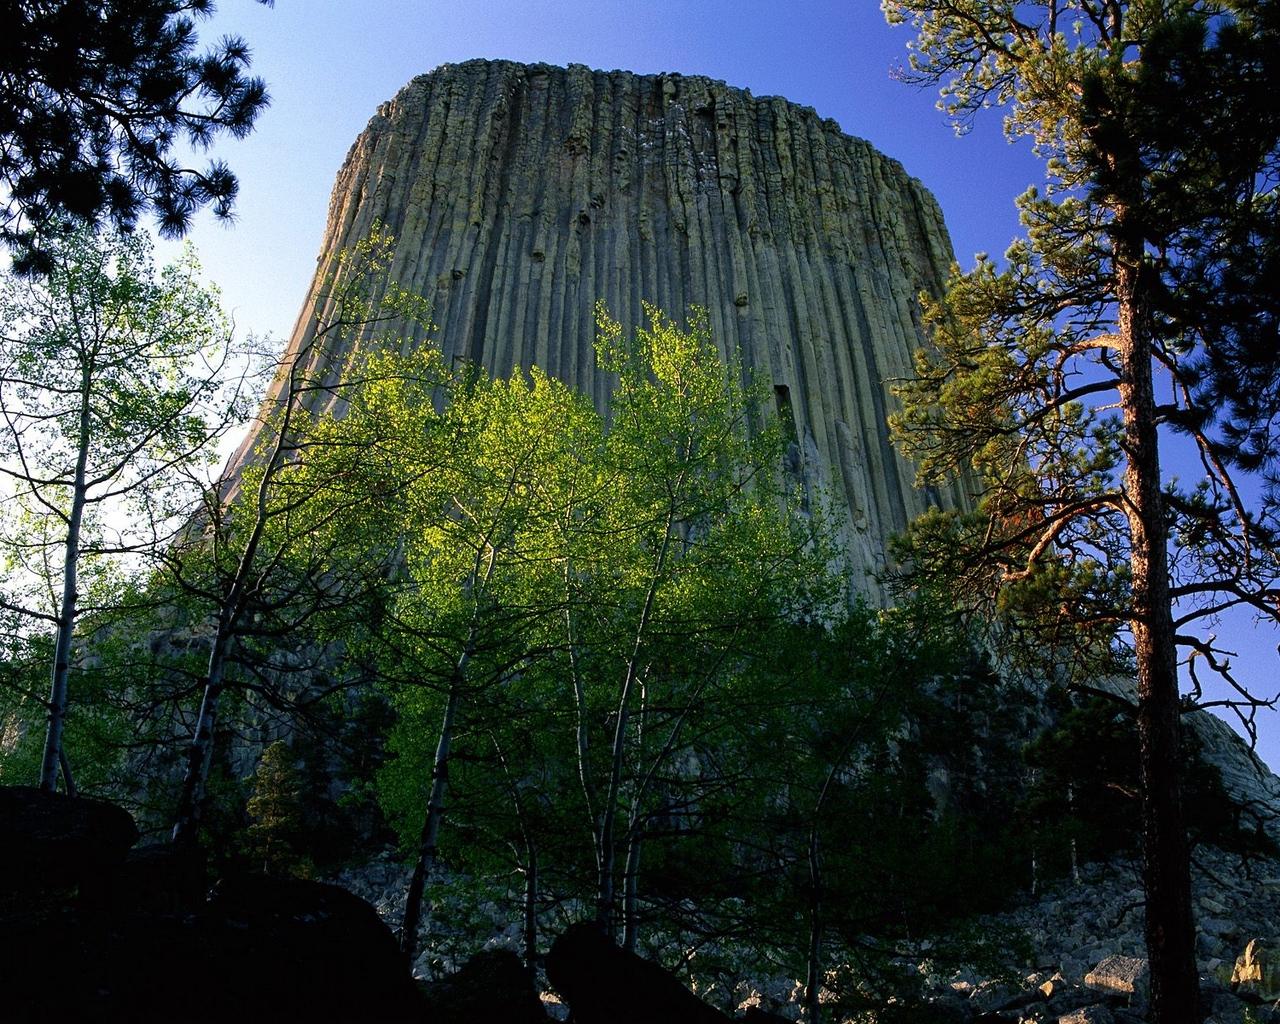 Download wallpaper 1280x1024 devils tower national monument, wyoming